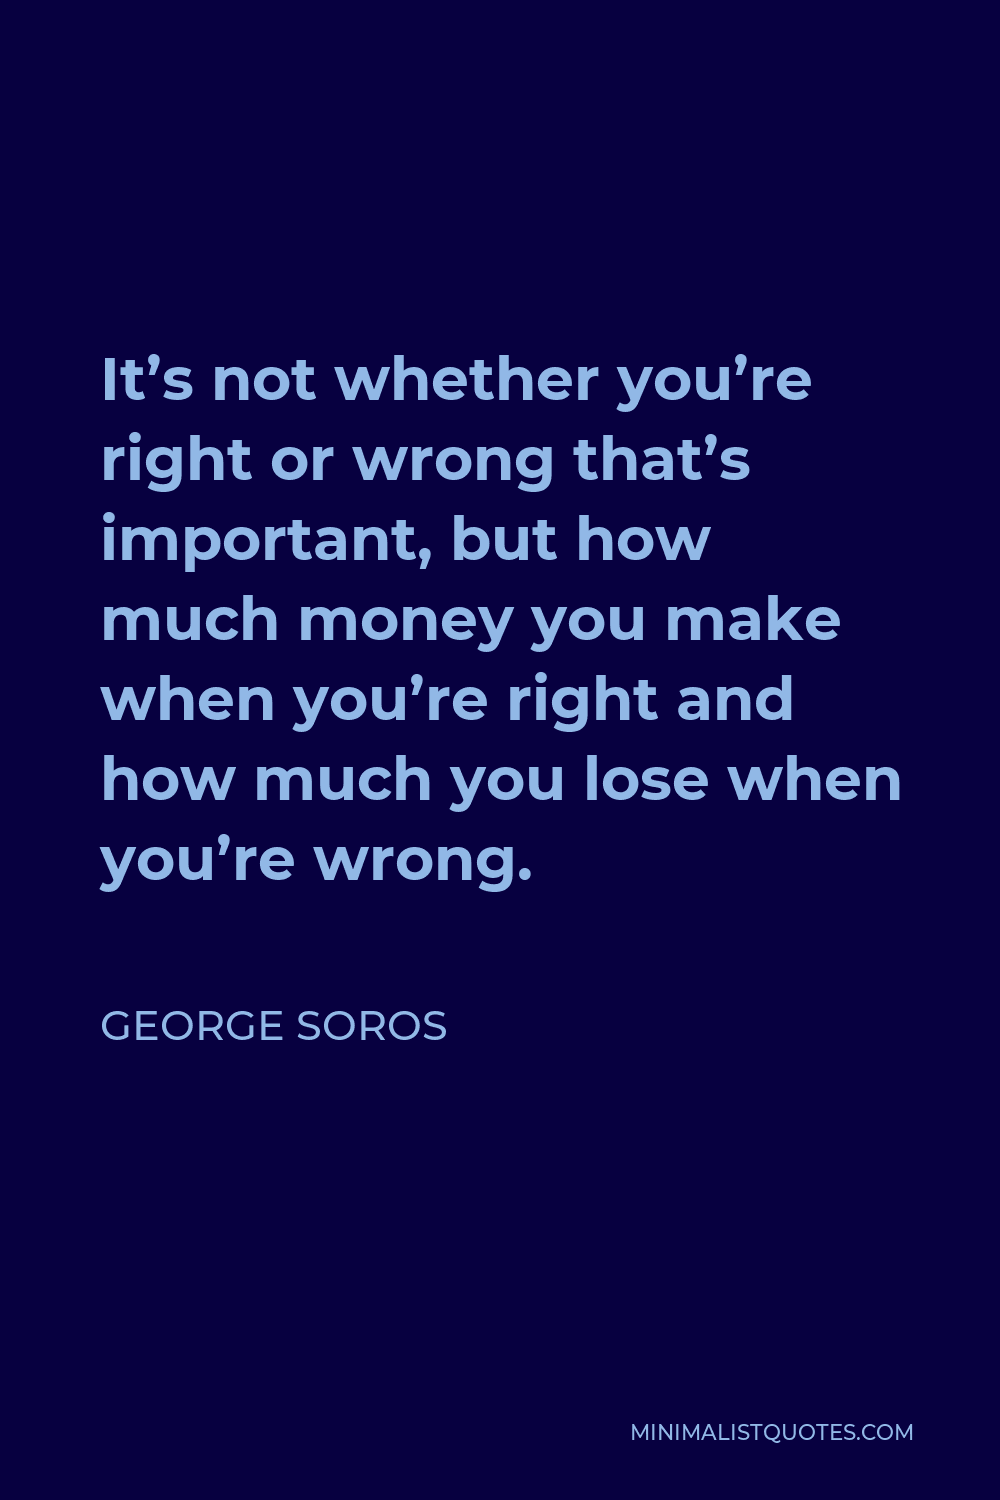 George Soros Quote - It’s not whether you’re right or wrong that’s important, but how much money you make when you’re right and how much you lose when you’re wrong.